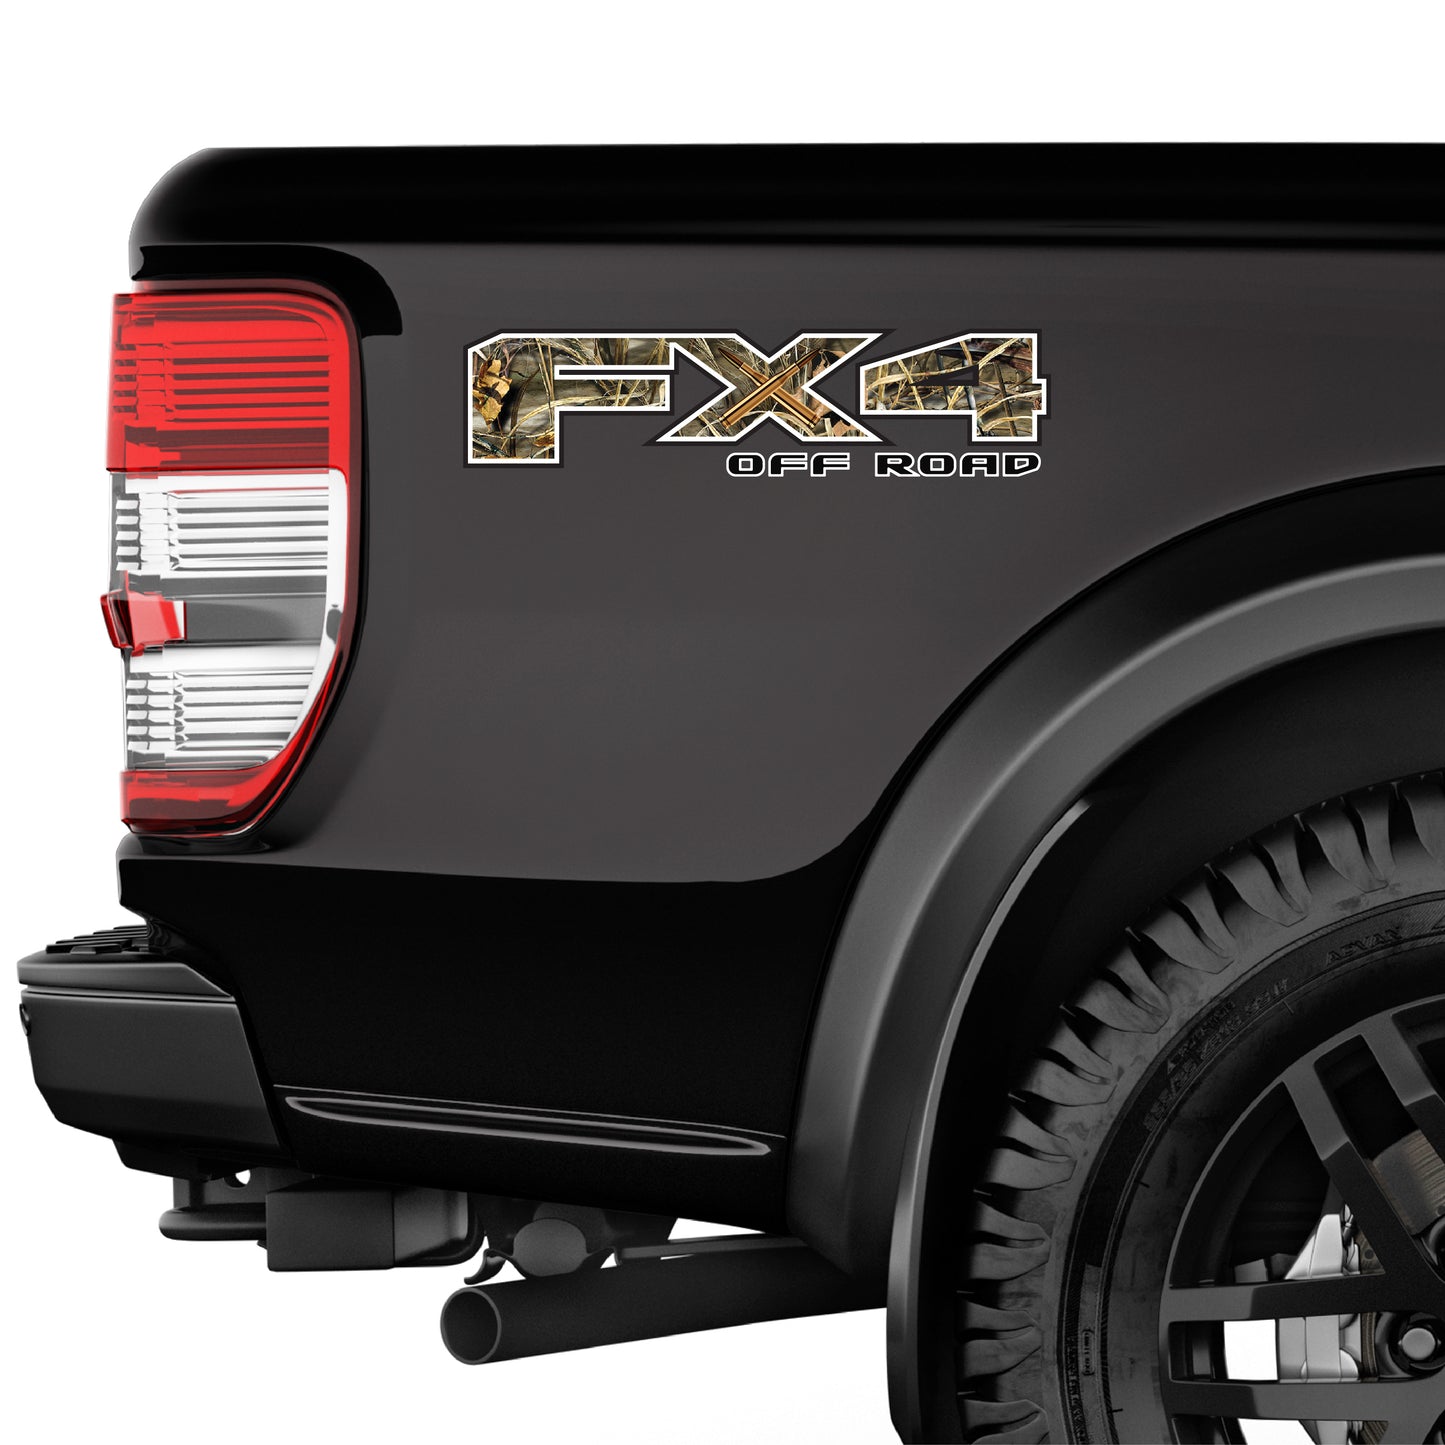 FX4 Off Road Camo Decal Replacement Sticker Ford F 150 Bedside Emblem for 4x4 Truck Super Duty